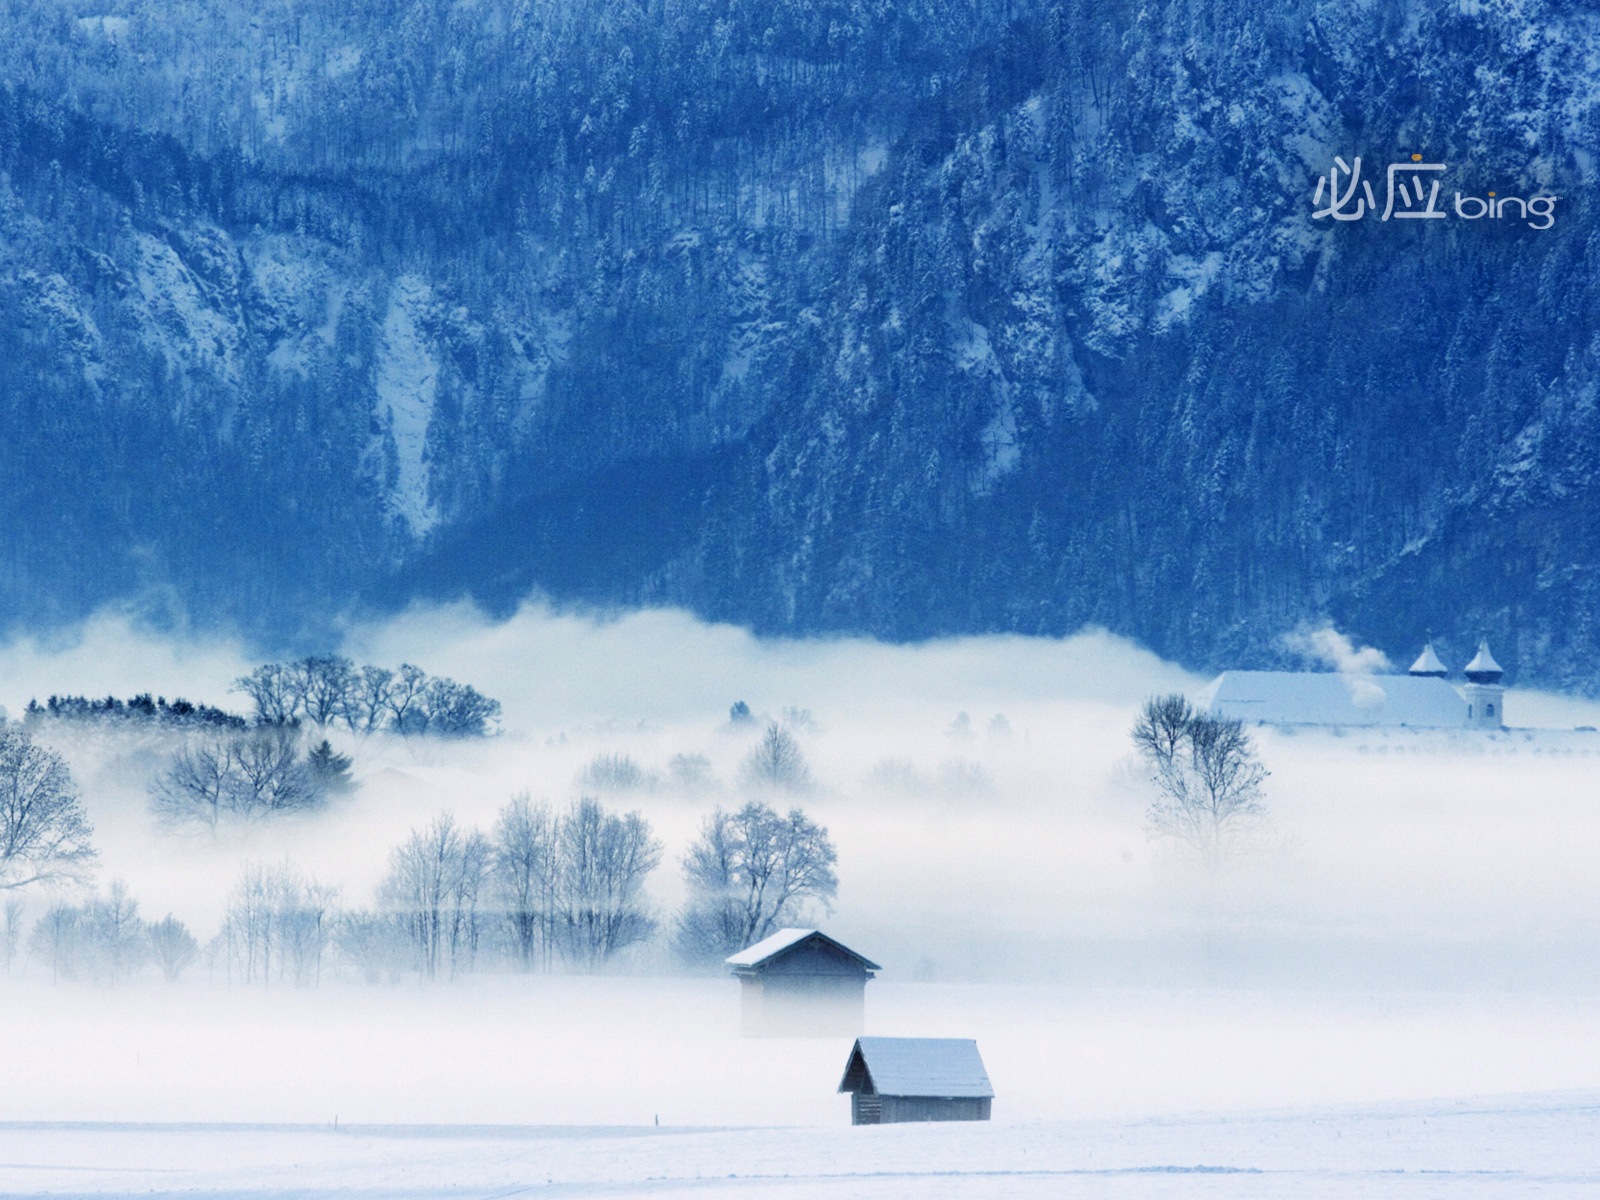 Bing selection best HD wallpapers: China theme wallpaper (2) #4 - 1600x1200